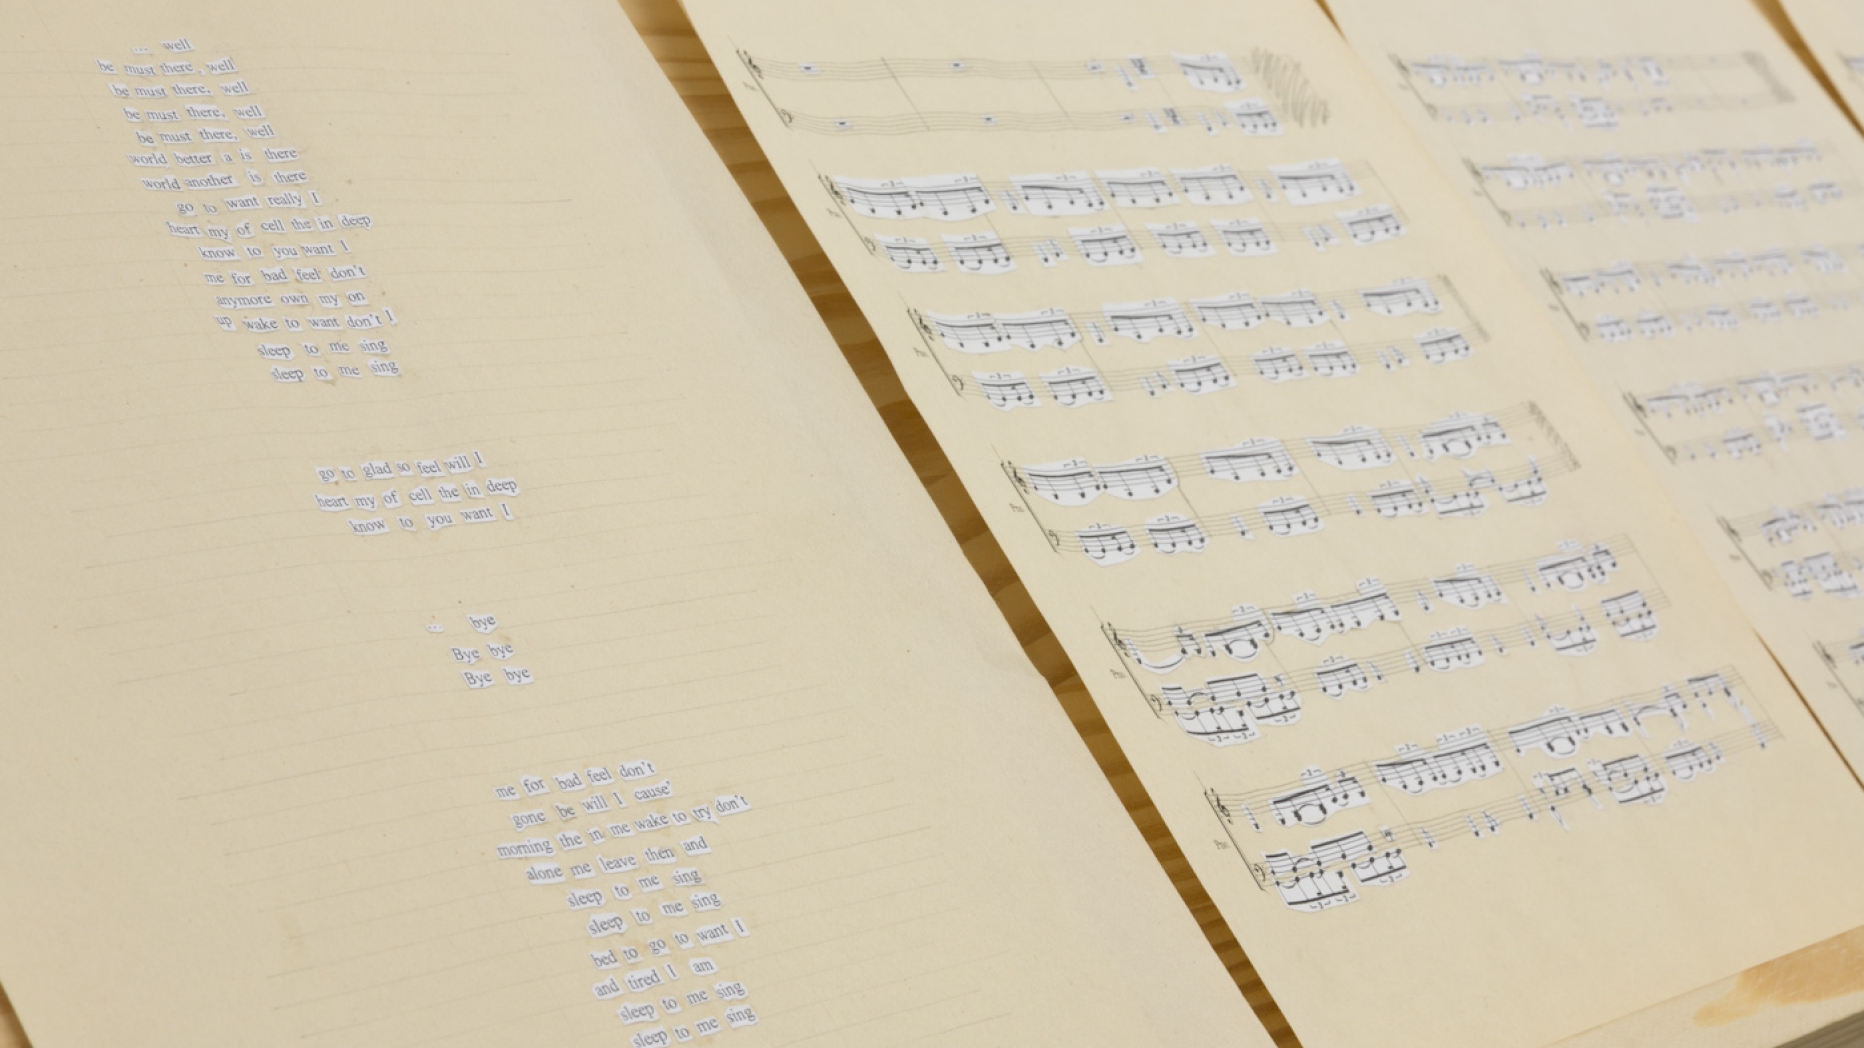 Pages showing blue handwriting and also blue handwritten musical notation.